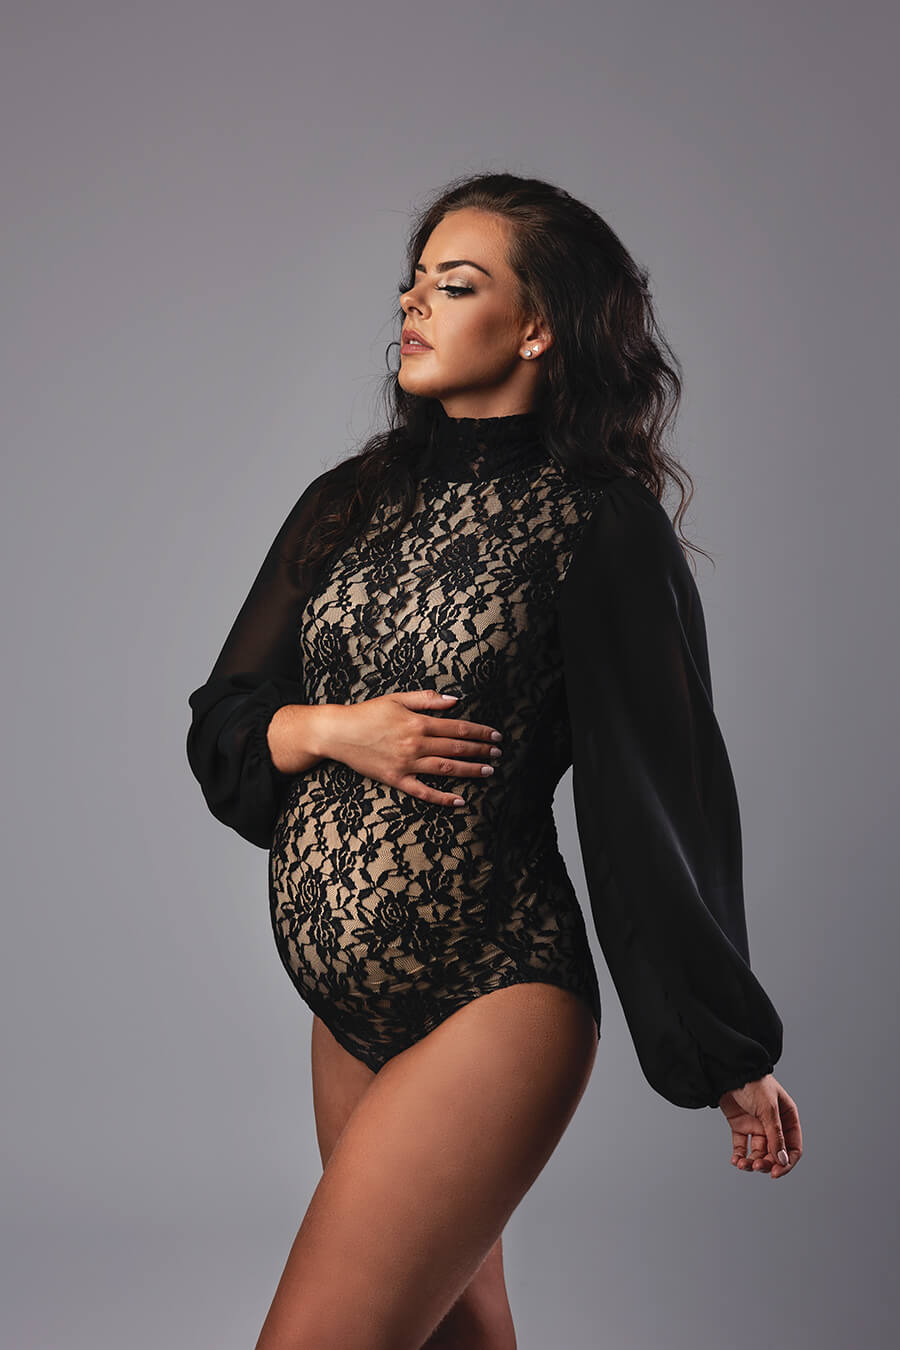 brunette pregnant model poses in a studio wearing a black lace bodysuit with chiffon bishop sleeves 